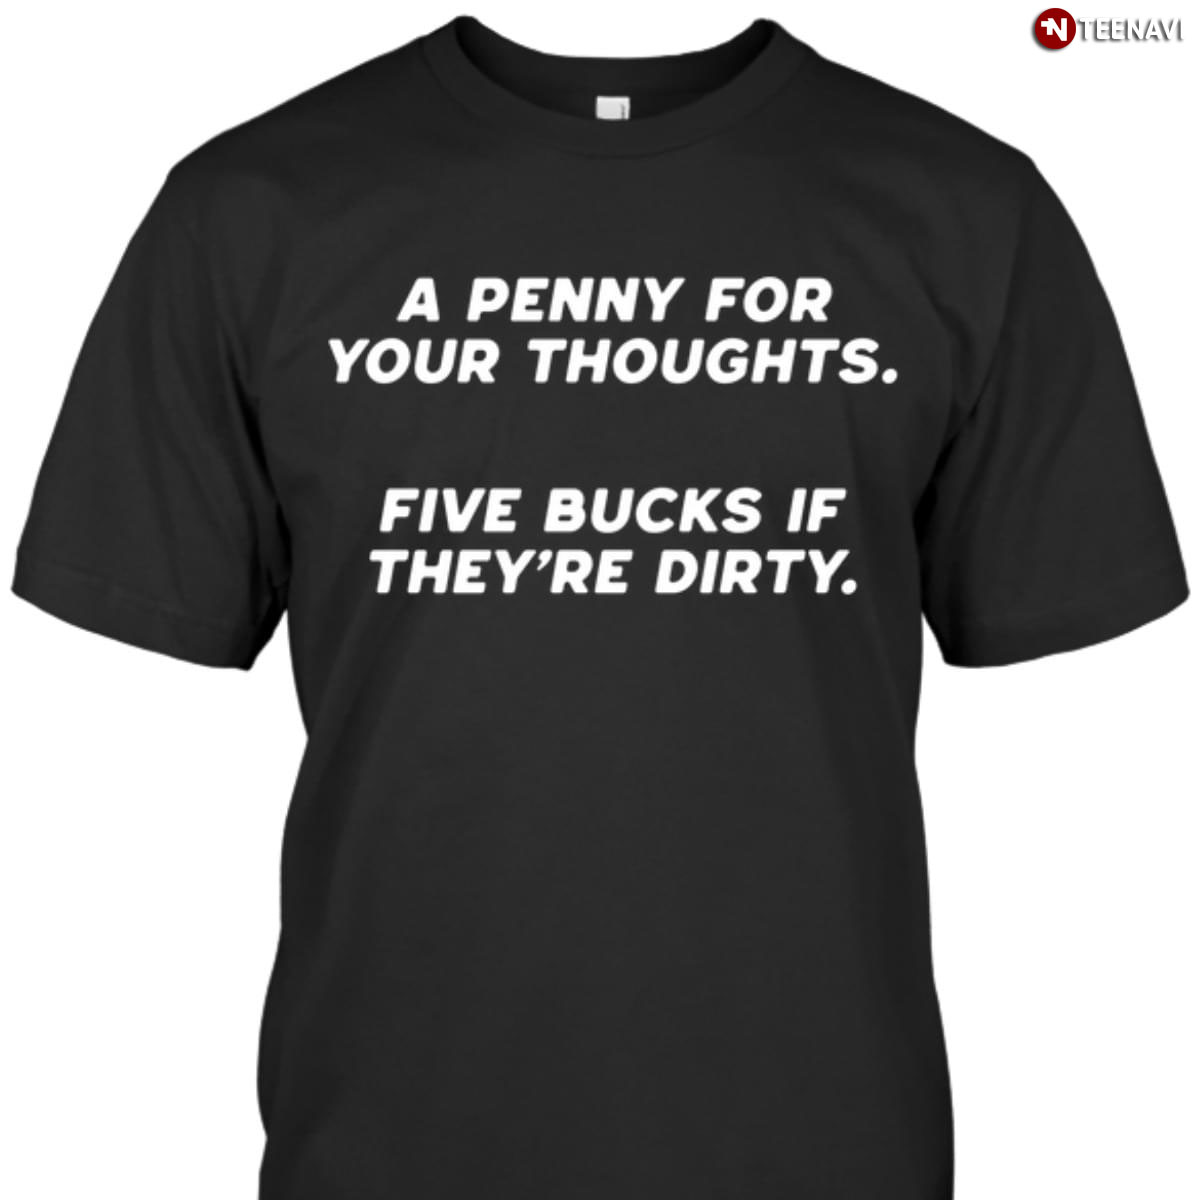 A Penny For Your Thoughts Five Bucks If They're Dirty